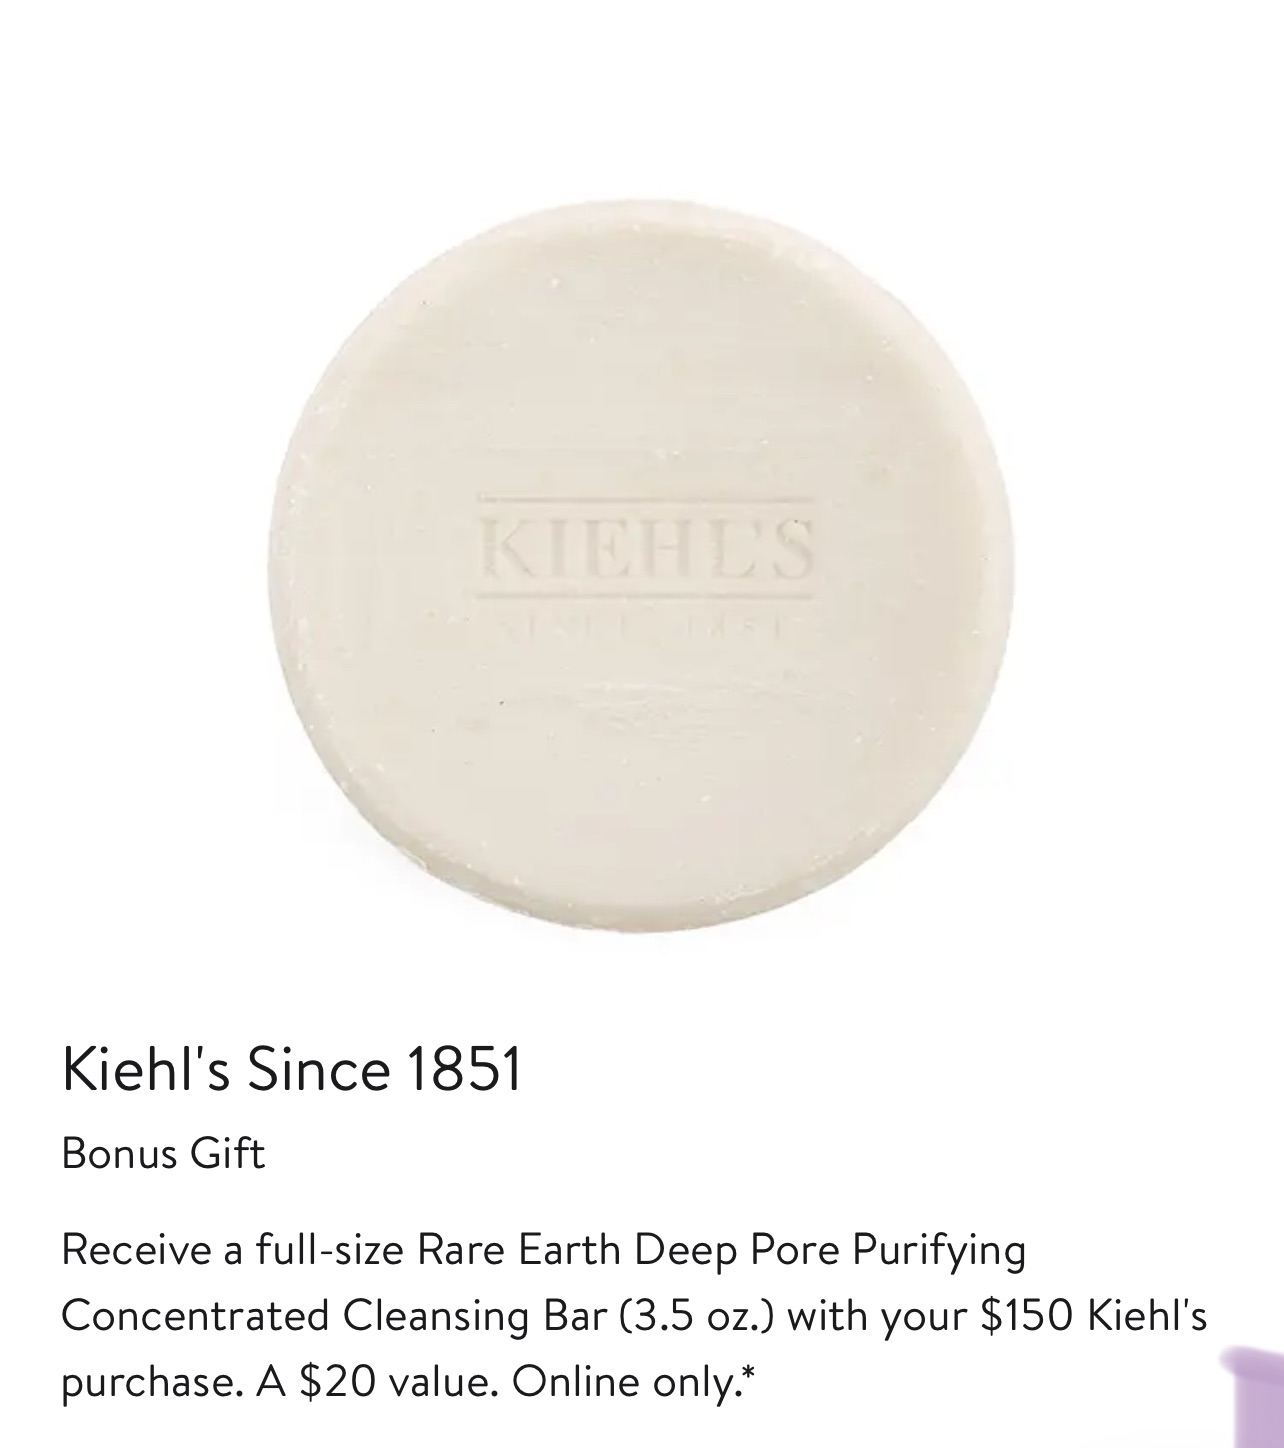 Nordstrom Kiehl's 满$150送正装 Rare Earth Deep Pore Purifying Concentrated Cleansing Bar (3.5 oz.) 价值$20